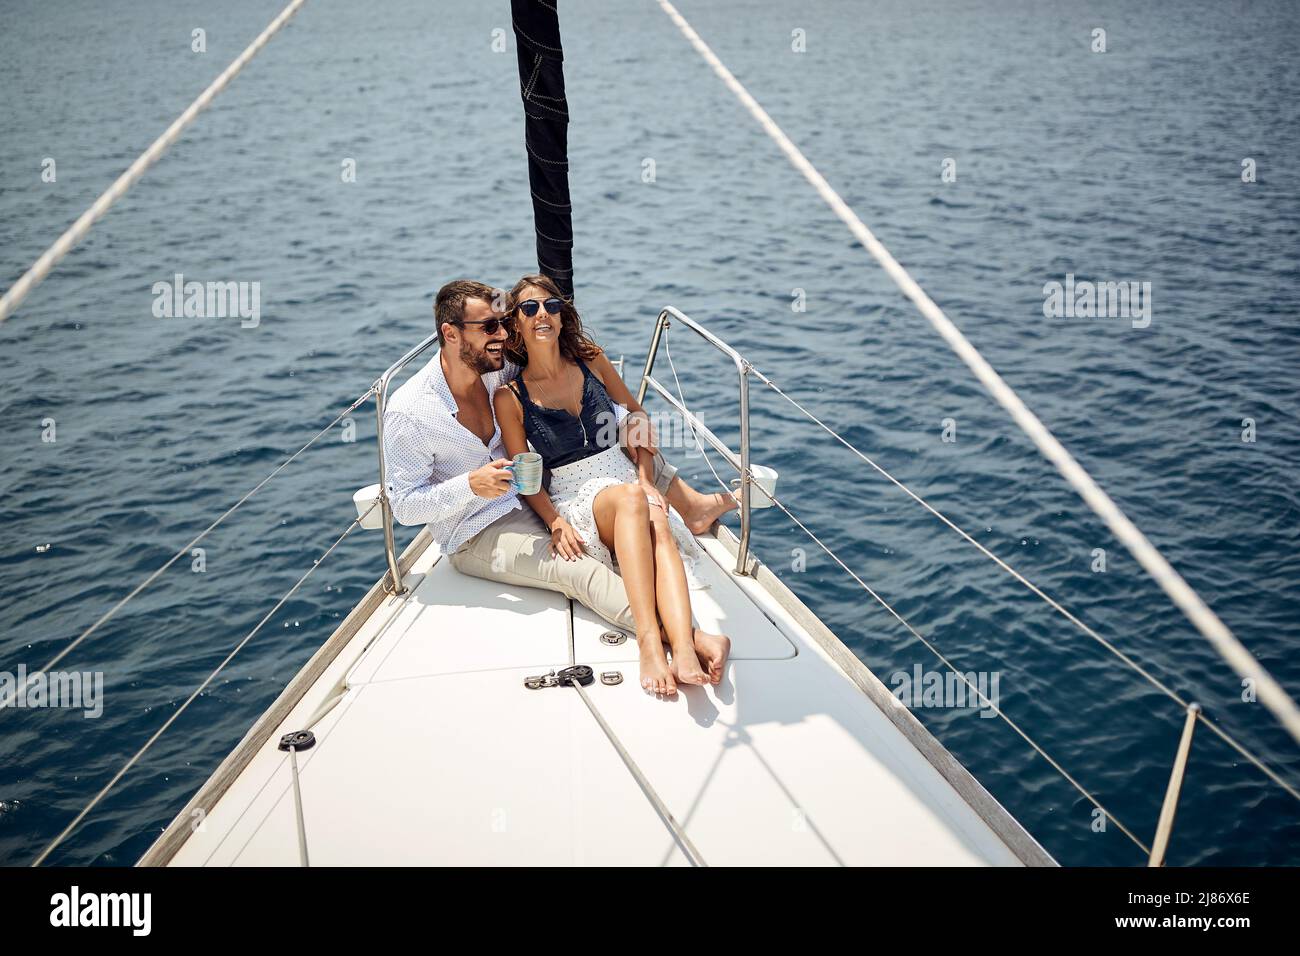 A young couple sitting on the bow of the yacht and enjoying a ride on a beautiful sunny day on the sea. Summer, sea, vacation, relationship Stock Photo